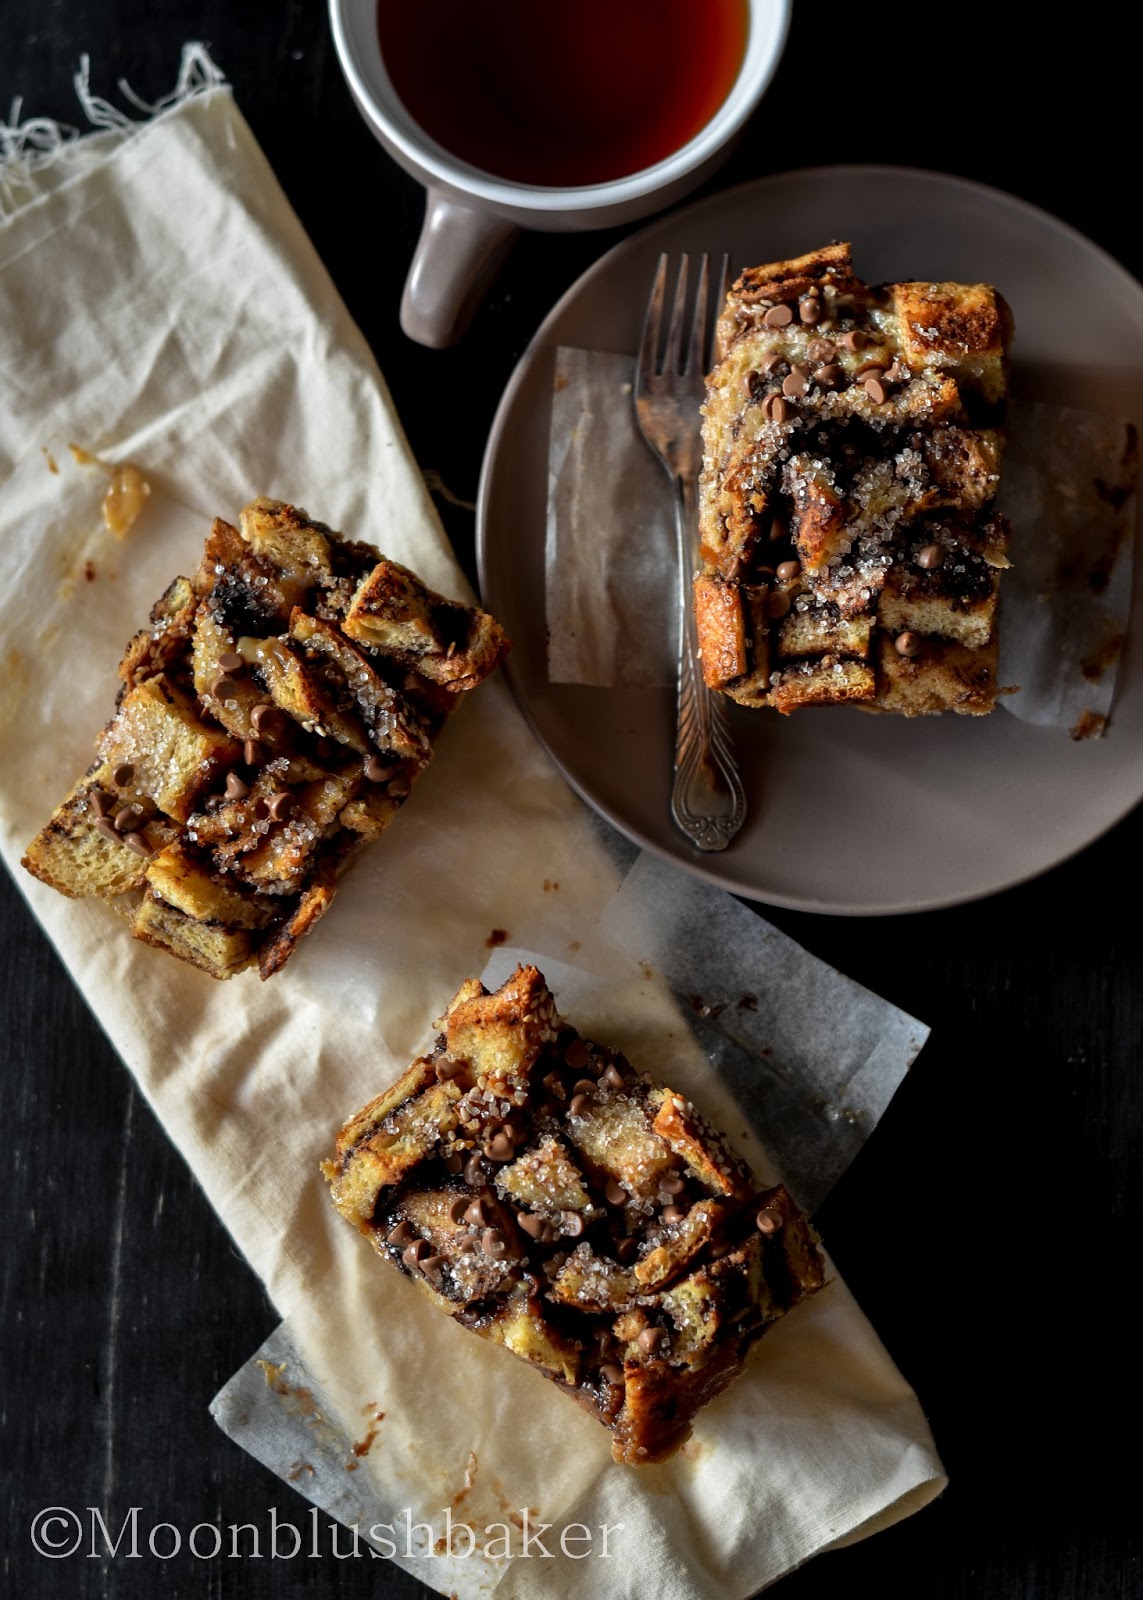 The moonblush Baker: Why Winter? /-/ Nutella “muffin” bread pudding